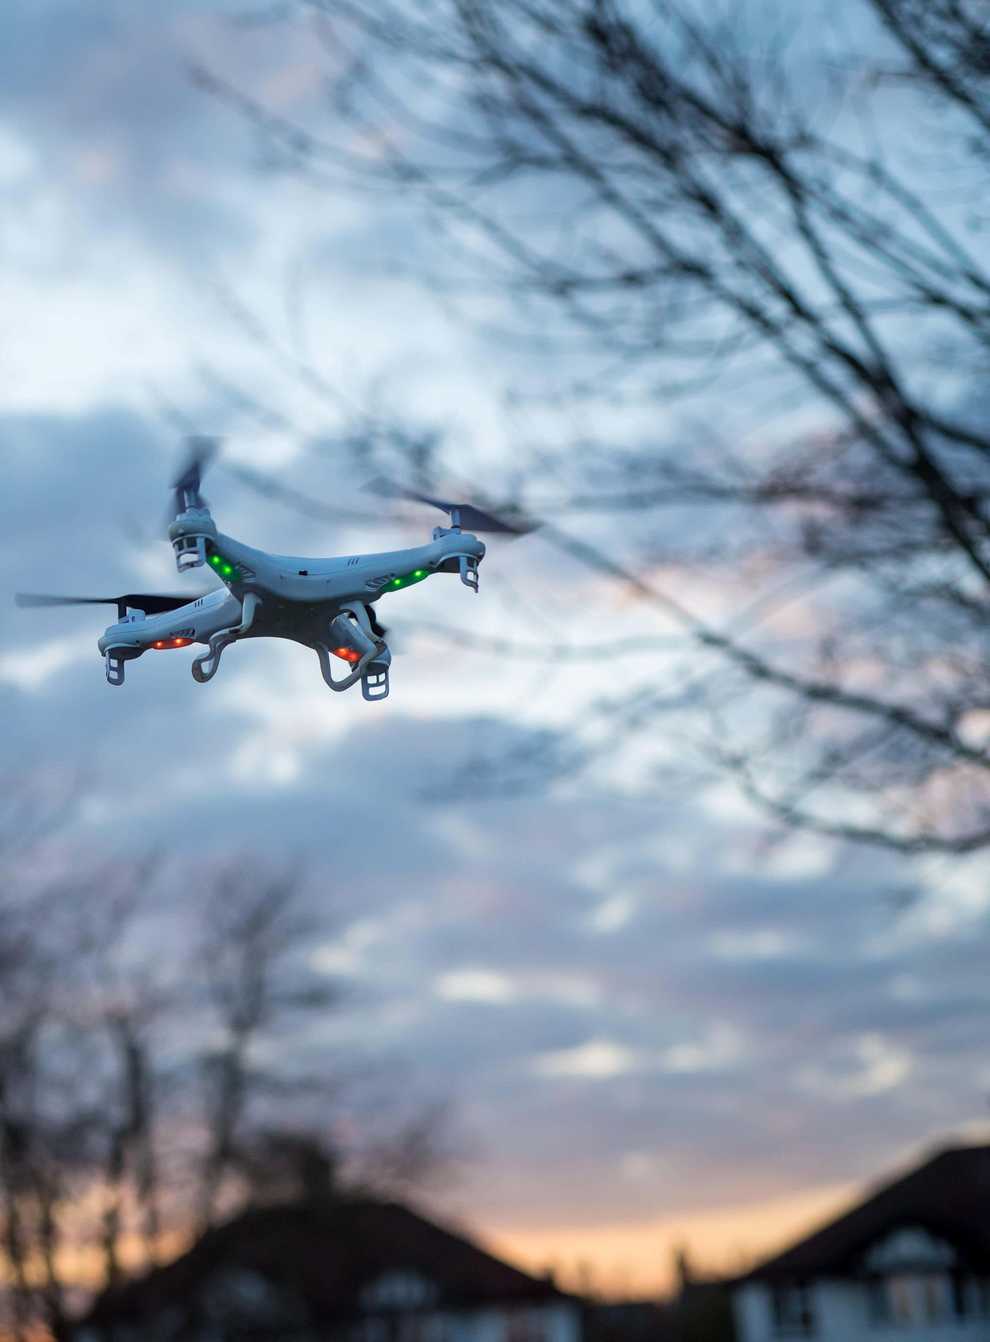 Four people were referred for prosecution by police for flying drones during the period after the Queen’s death (Alamy/PA)